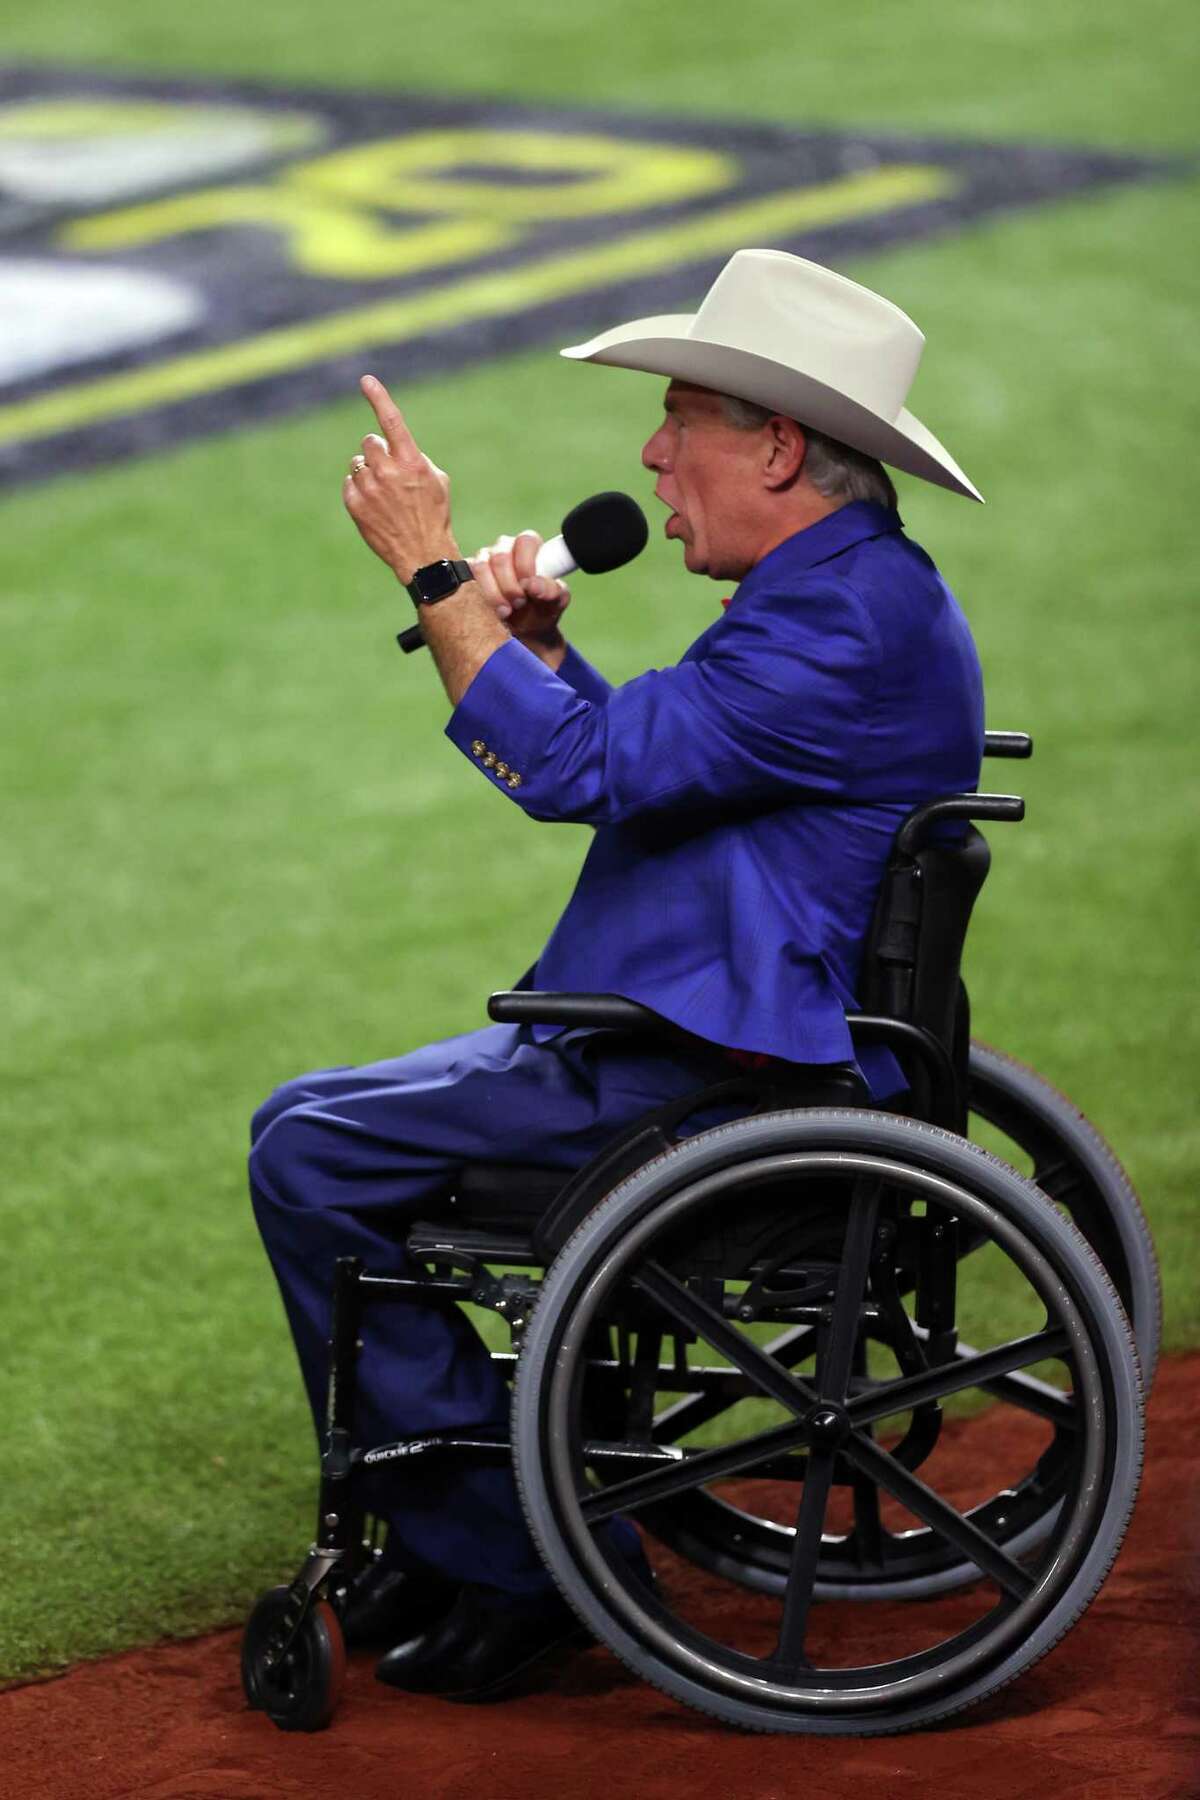 ARLINGTON, TEXAS - OCTOBER 20: Governor of Texas Greg Abbott ushers in the game by calling out the traditional “play ball!” prior to Game One of the 2020 MLB World Series at Globe Life Park between the Los Angeles Dodgers and the Tampa Bay Rays on October 20, 2020 in Arlington, Texas. (Photo by Ronald Martinez/Getty Images)